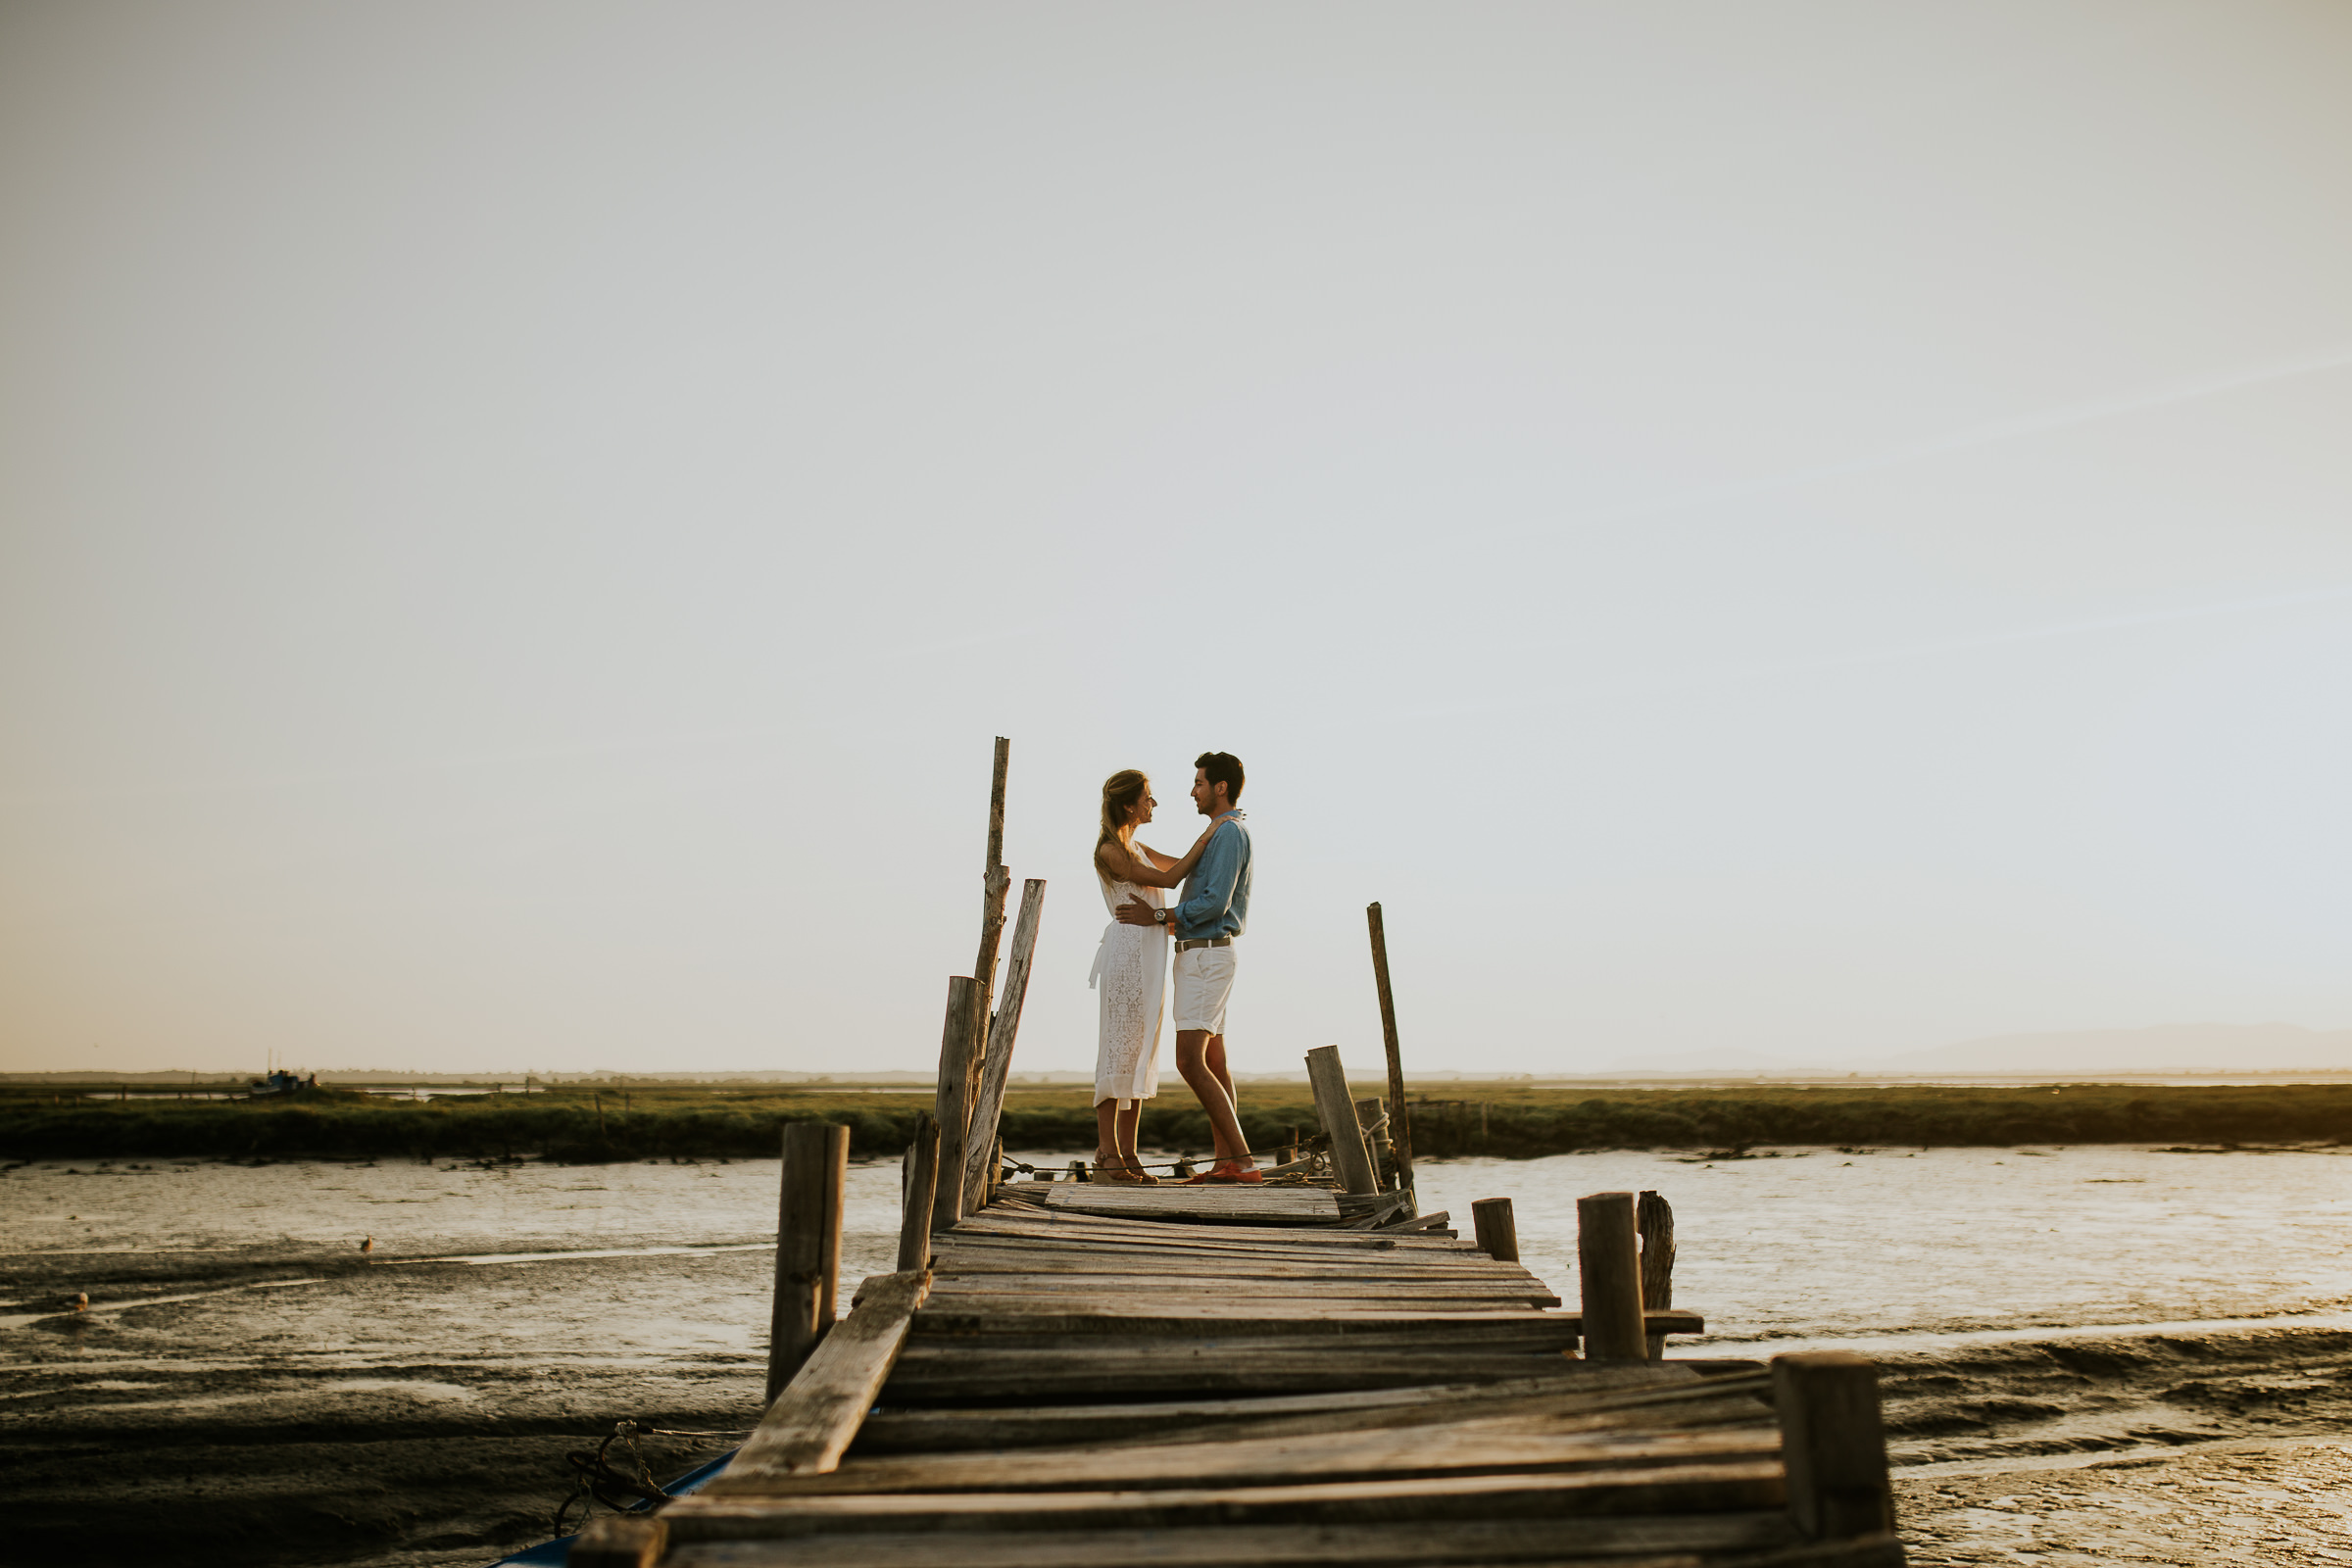 Hugged couple facing each other in a wooden dock